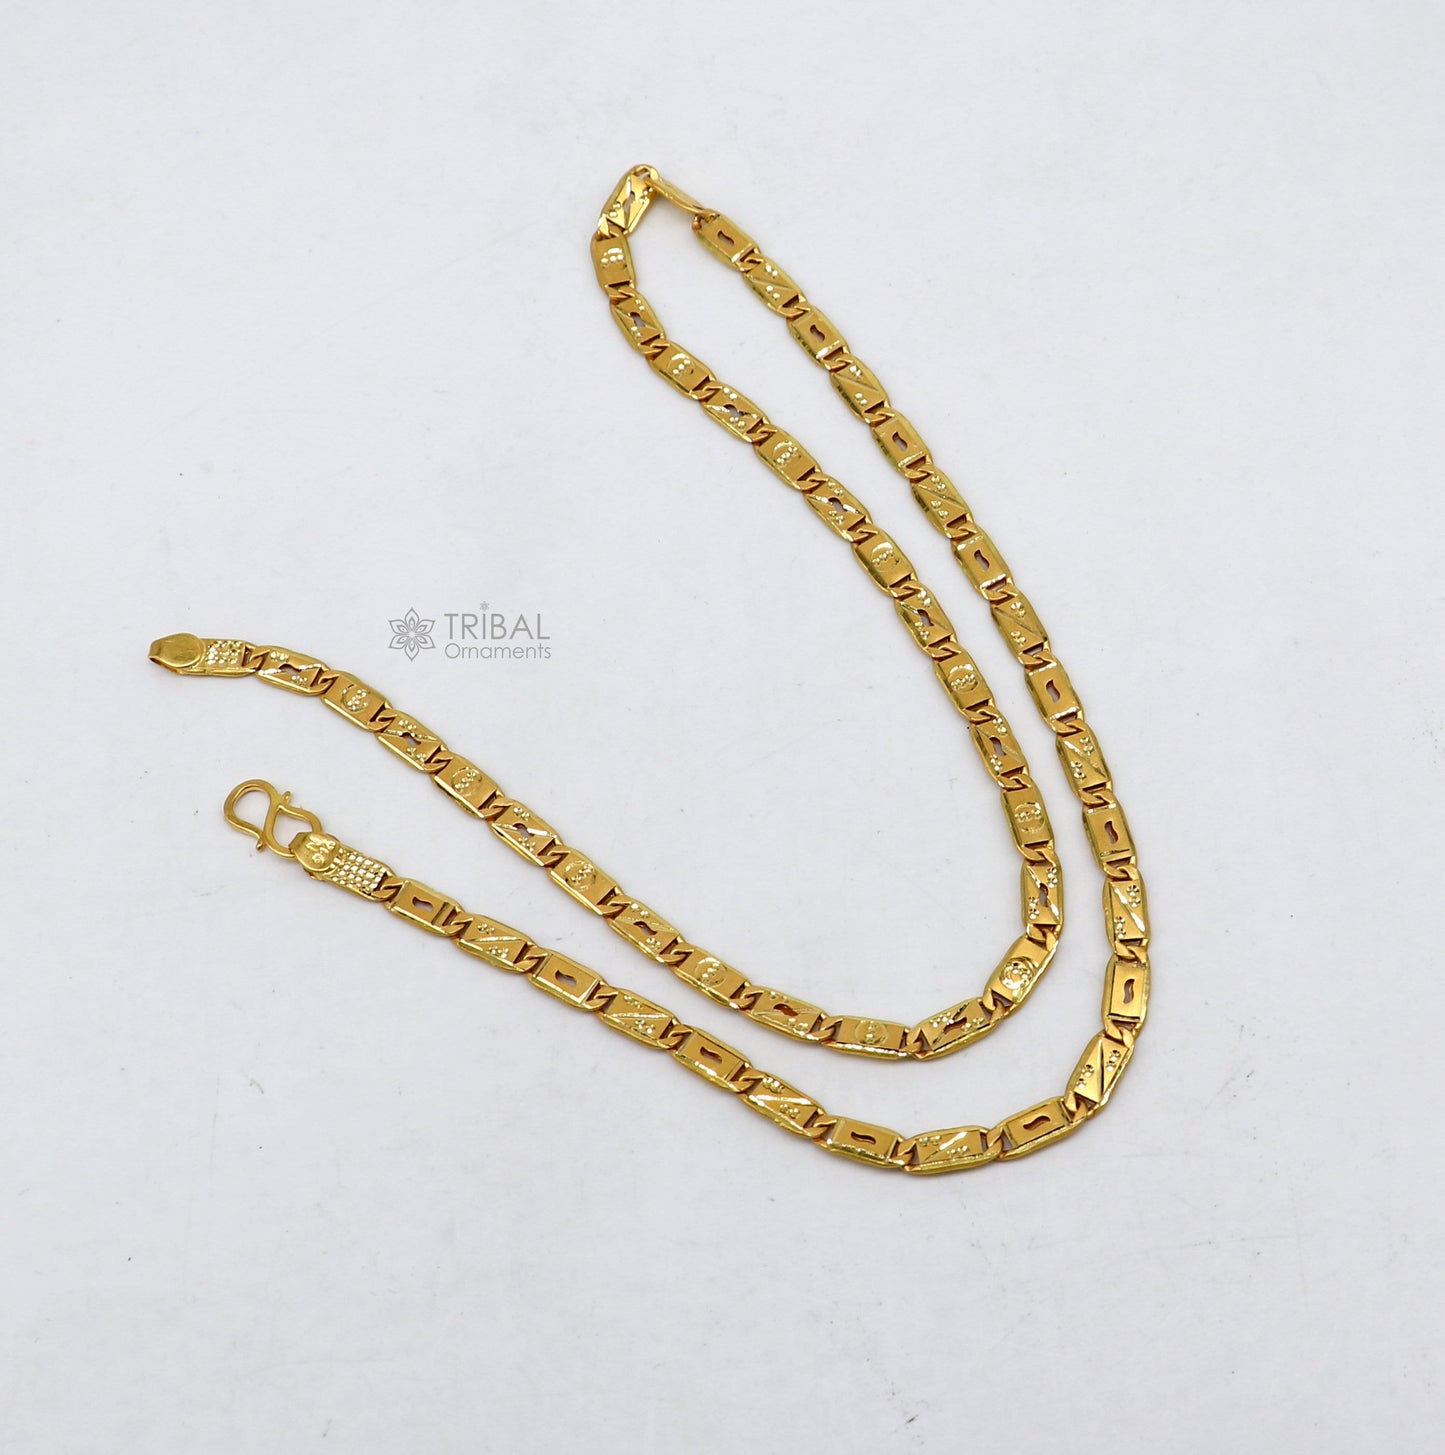 Exclusive modern trendy 22kt yellow gold handmade nawabi chain best men's gifting chain necklace jewelry gch584 - TRIBAL ORNAMENTS